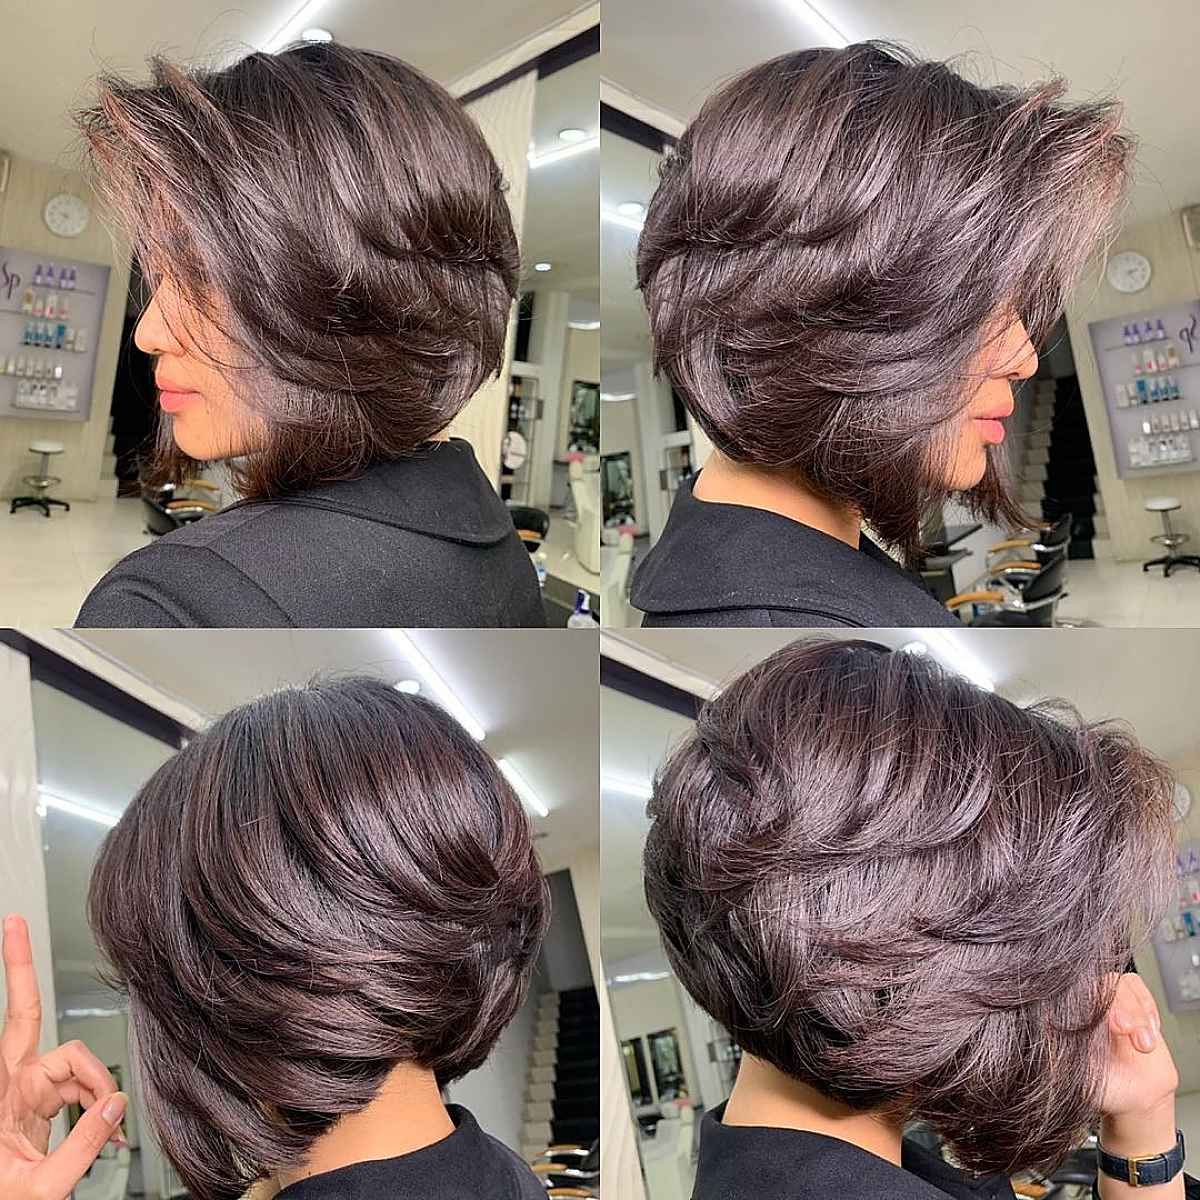 26 Feathered Bob Haircuts That Add Fullness & Movement To Your Hair In Recent Curly Lob Haircuts With Feathered Ends (View 17 of 20)